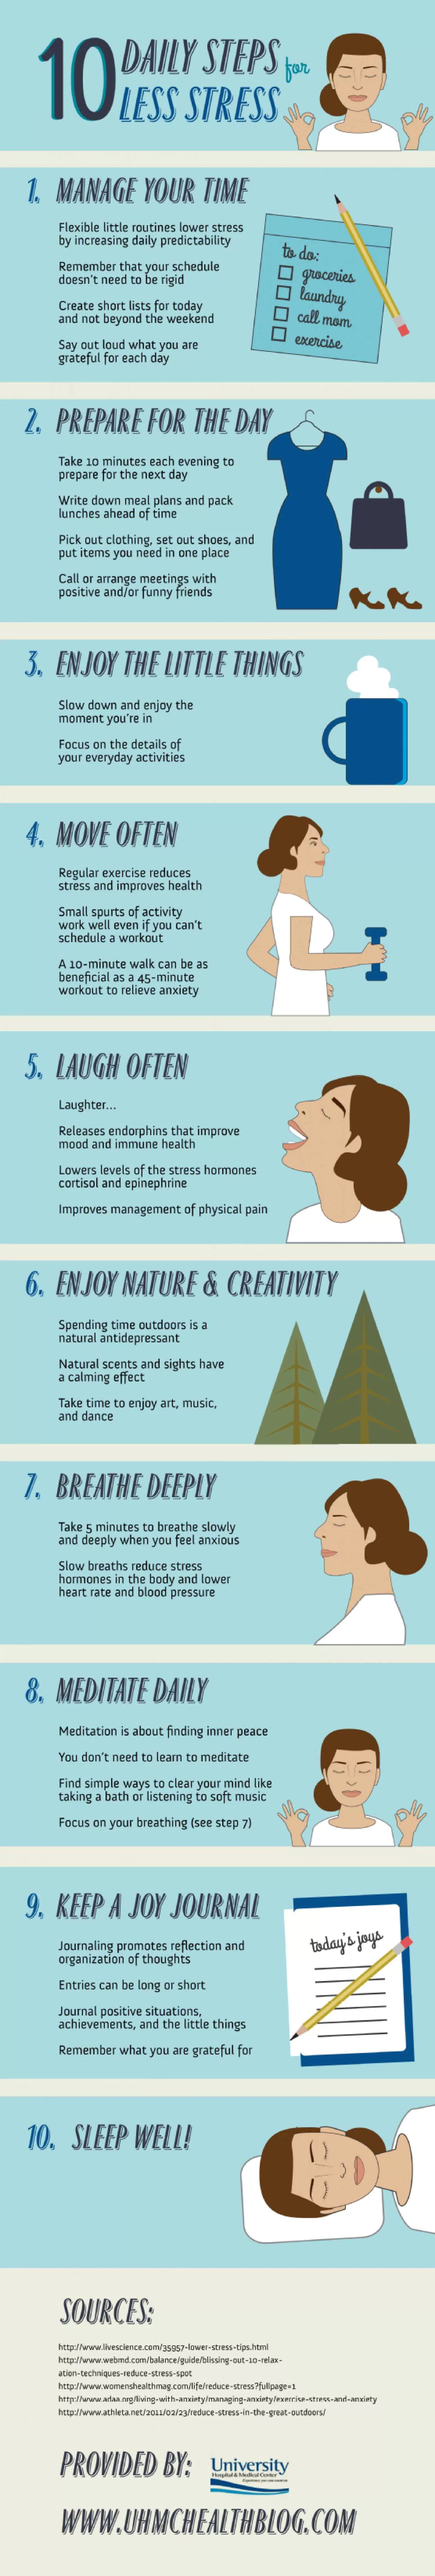 10 Daily Steps For Less Stress